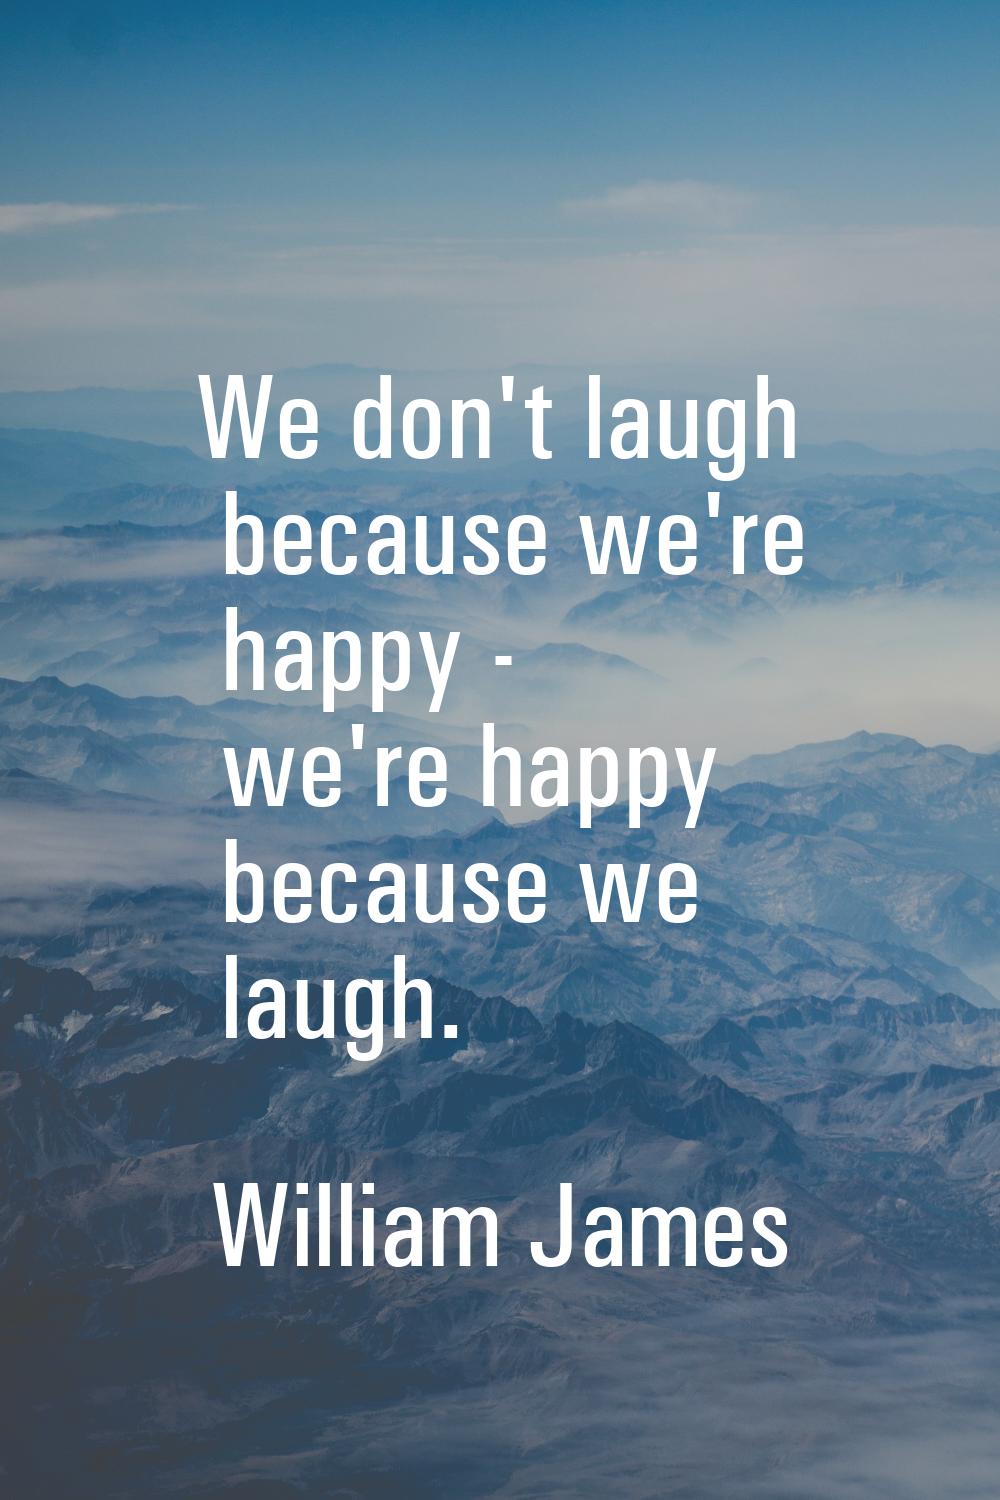 We don't laugh because we're happy - we're happy because we laugh.